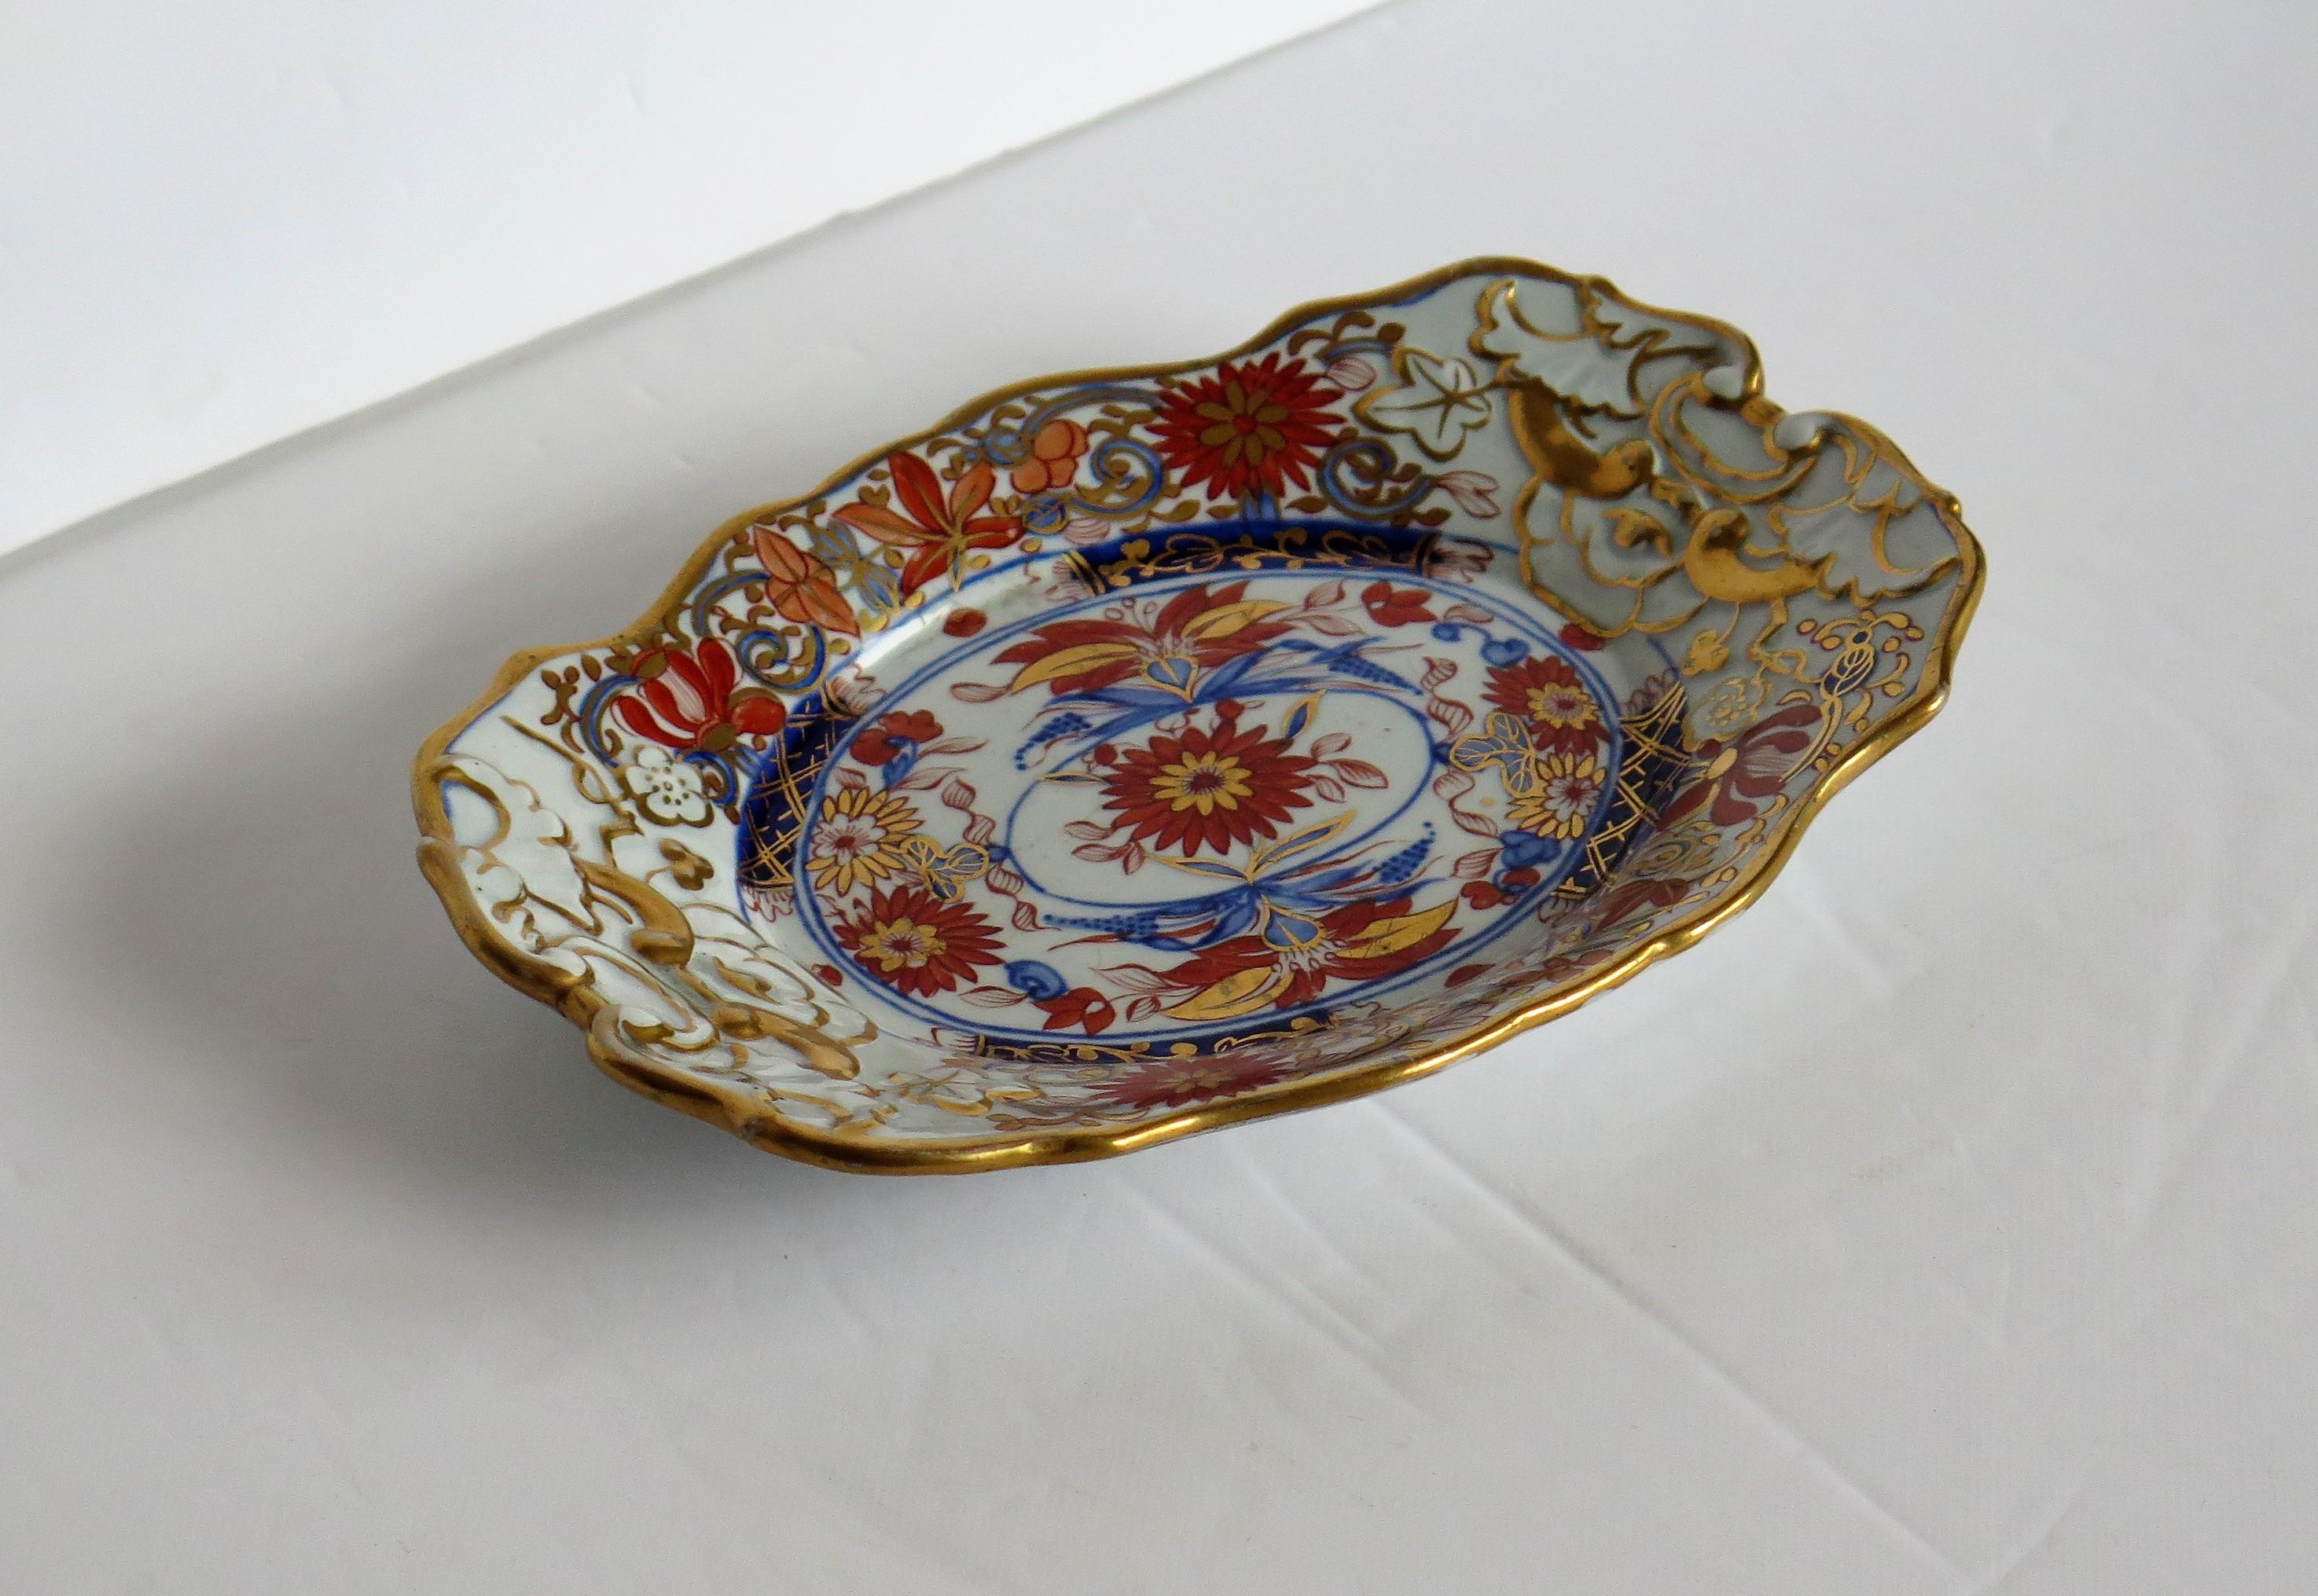 This is a finely hand painted Mason's ironstone sweetmeat or desert dish in the rare pattern called 